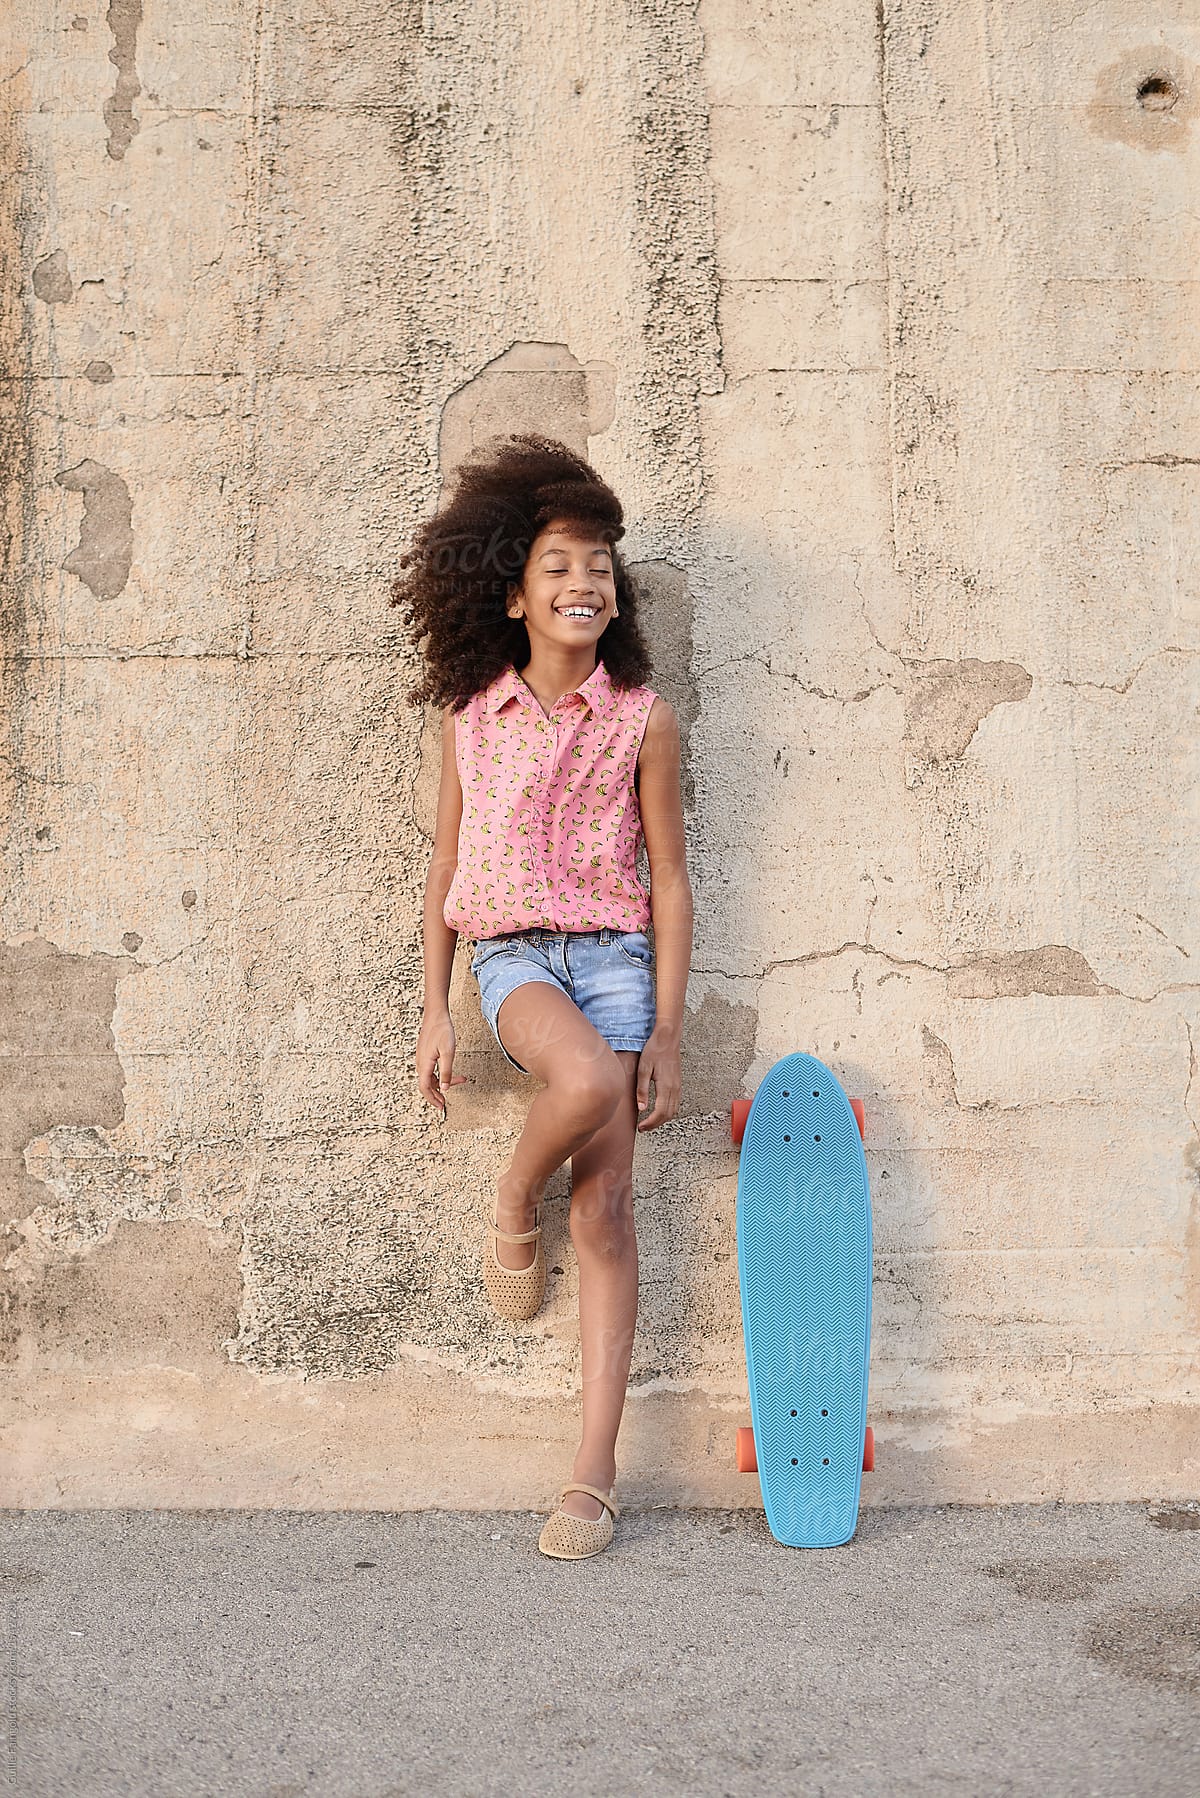 Little With Penny Board." by Stocksy Contributor "Guille Faingold" - Stocksy